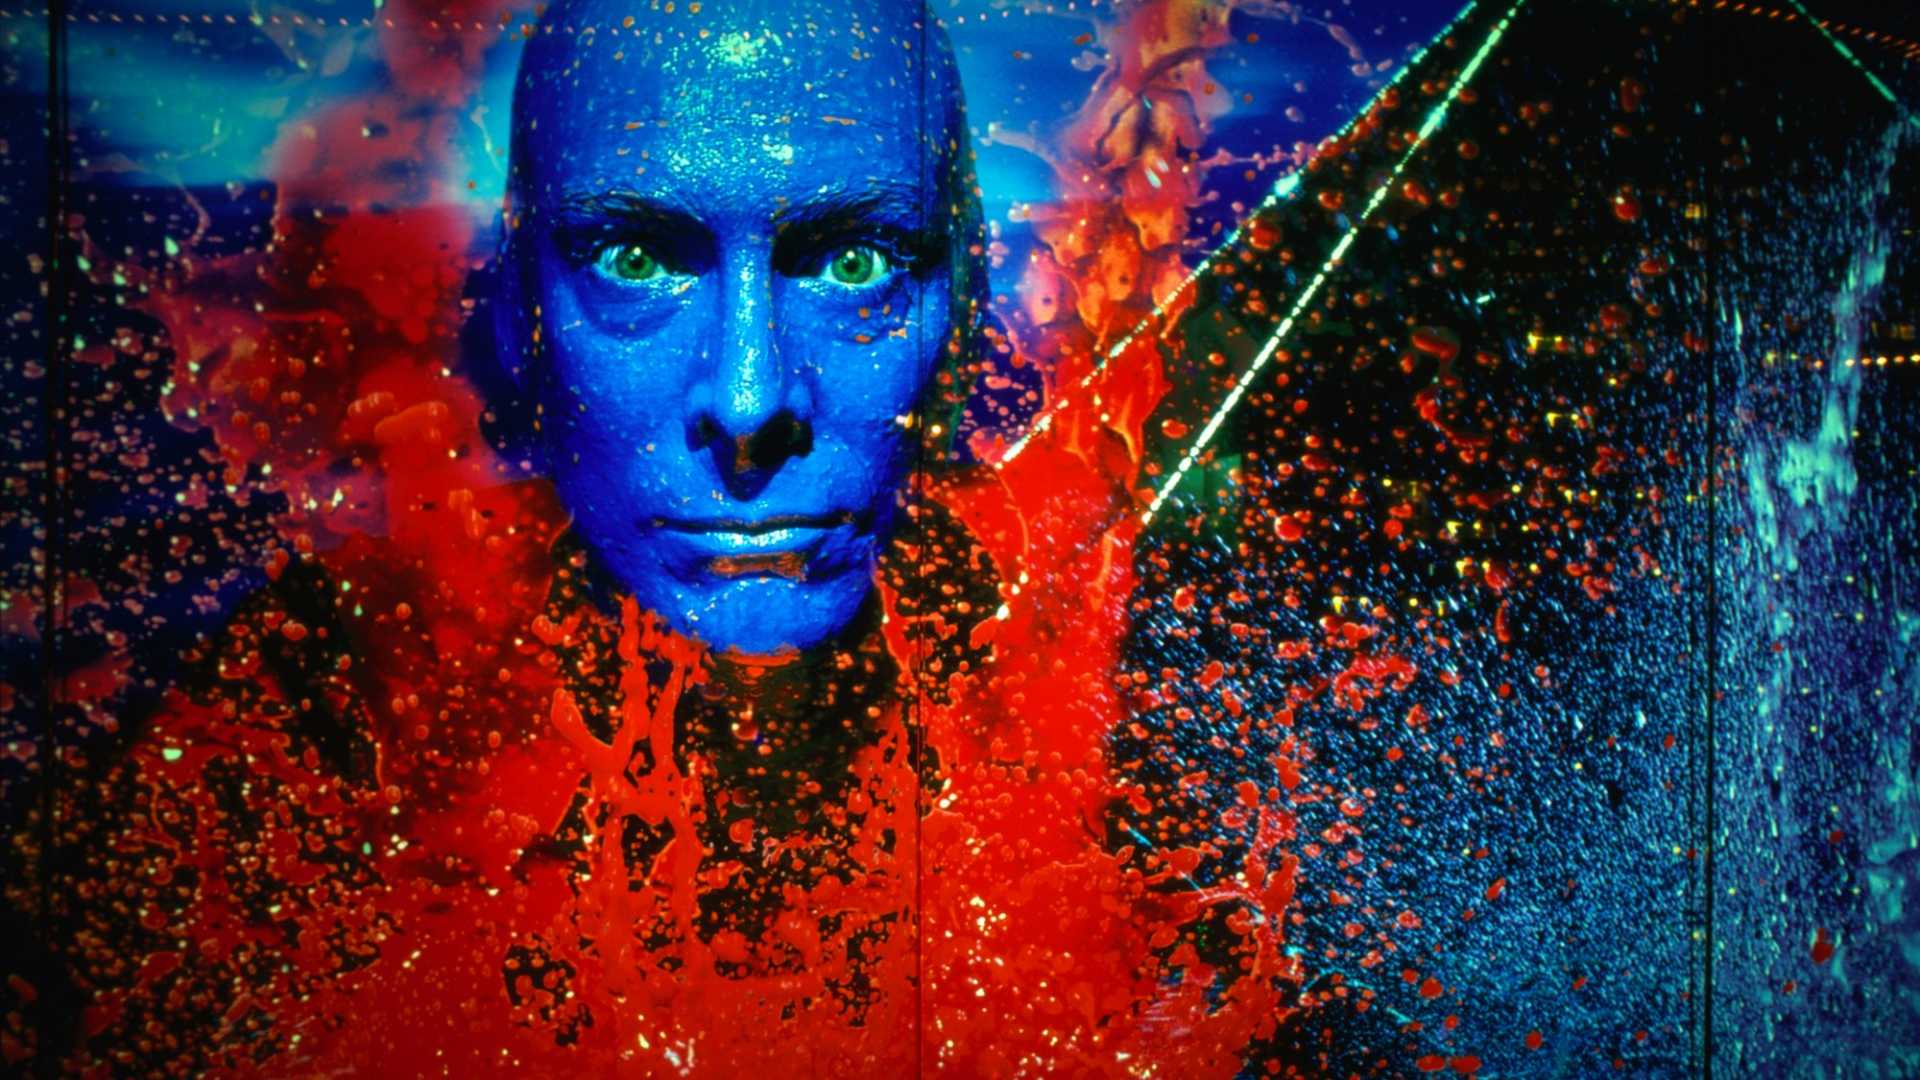 How the Blue Man Group Stays Creative